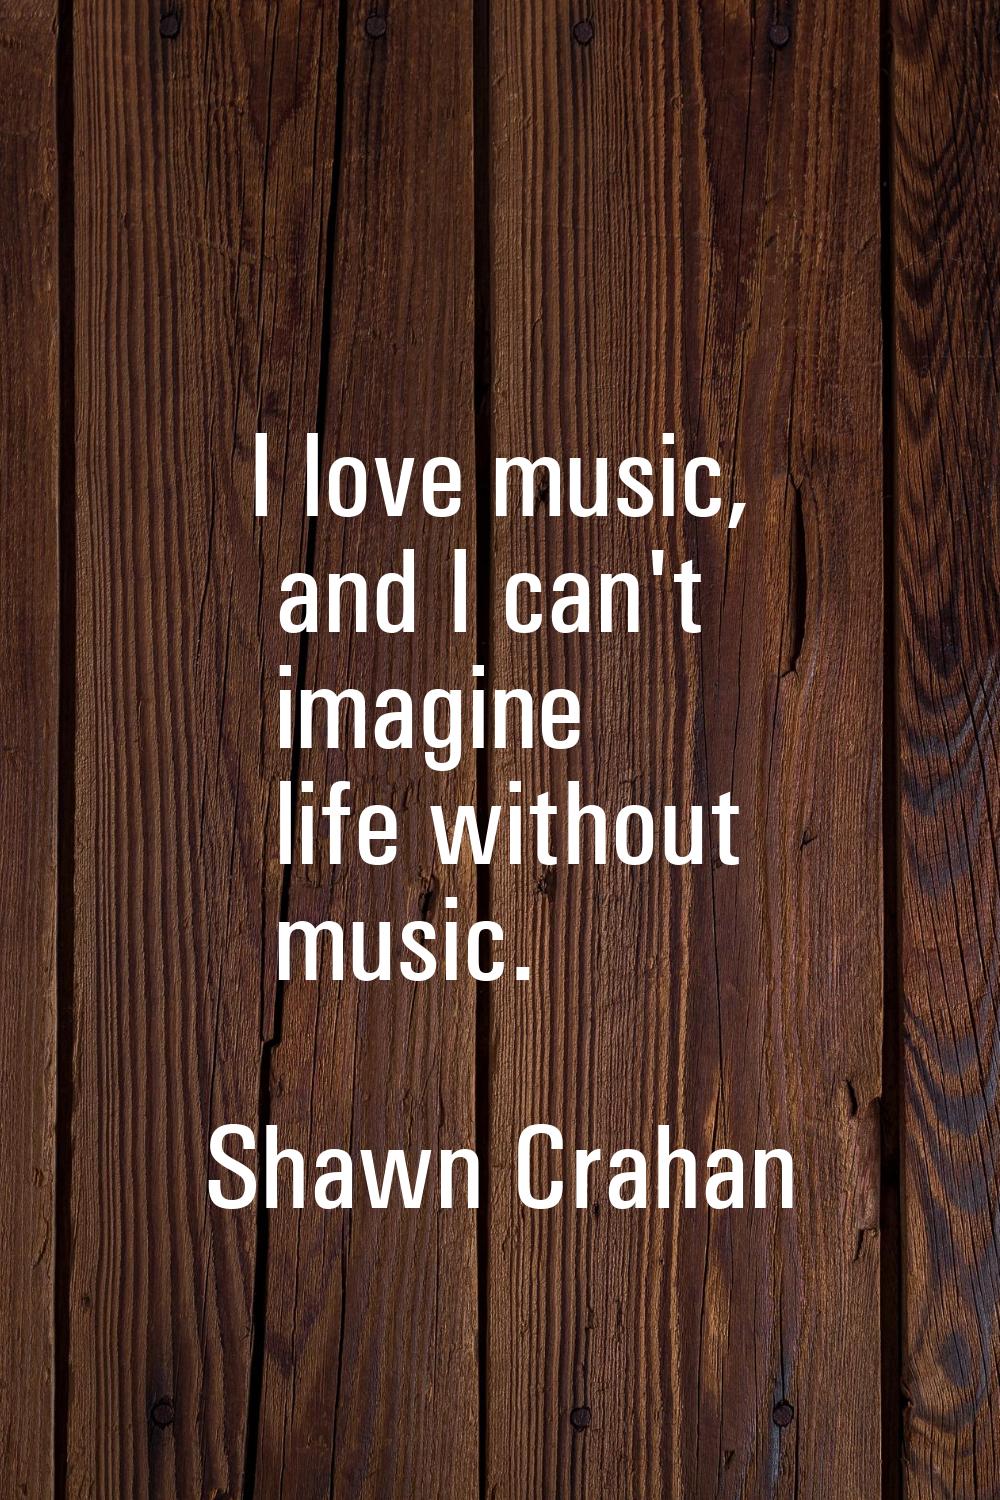 I love music, and I can't imagine life without music.